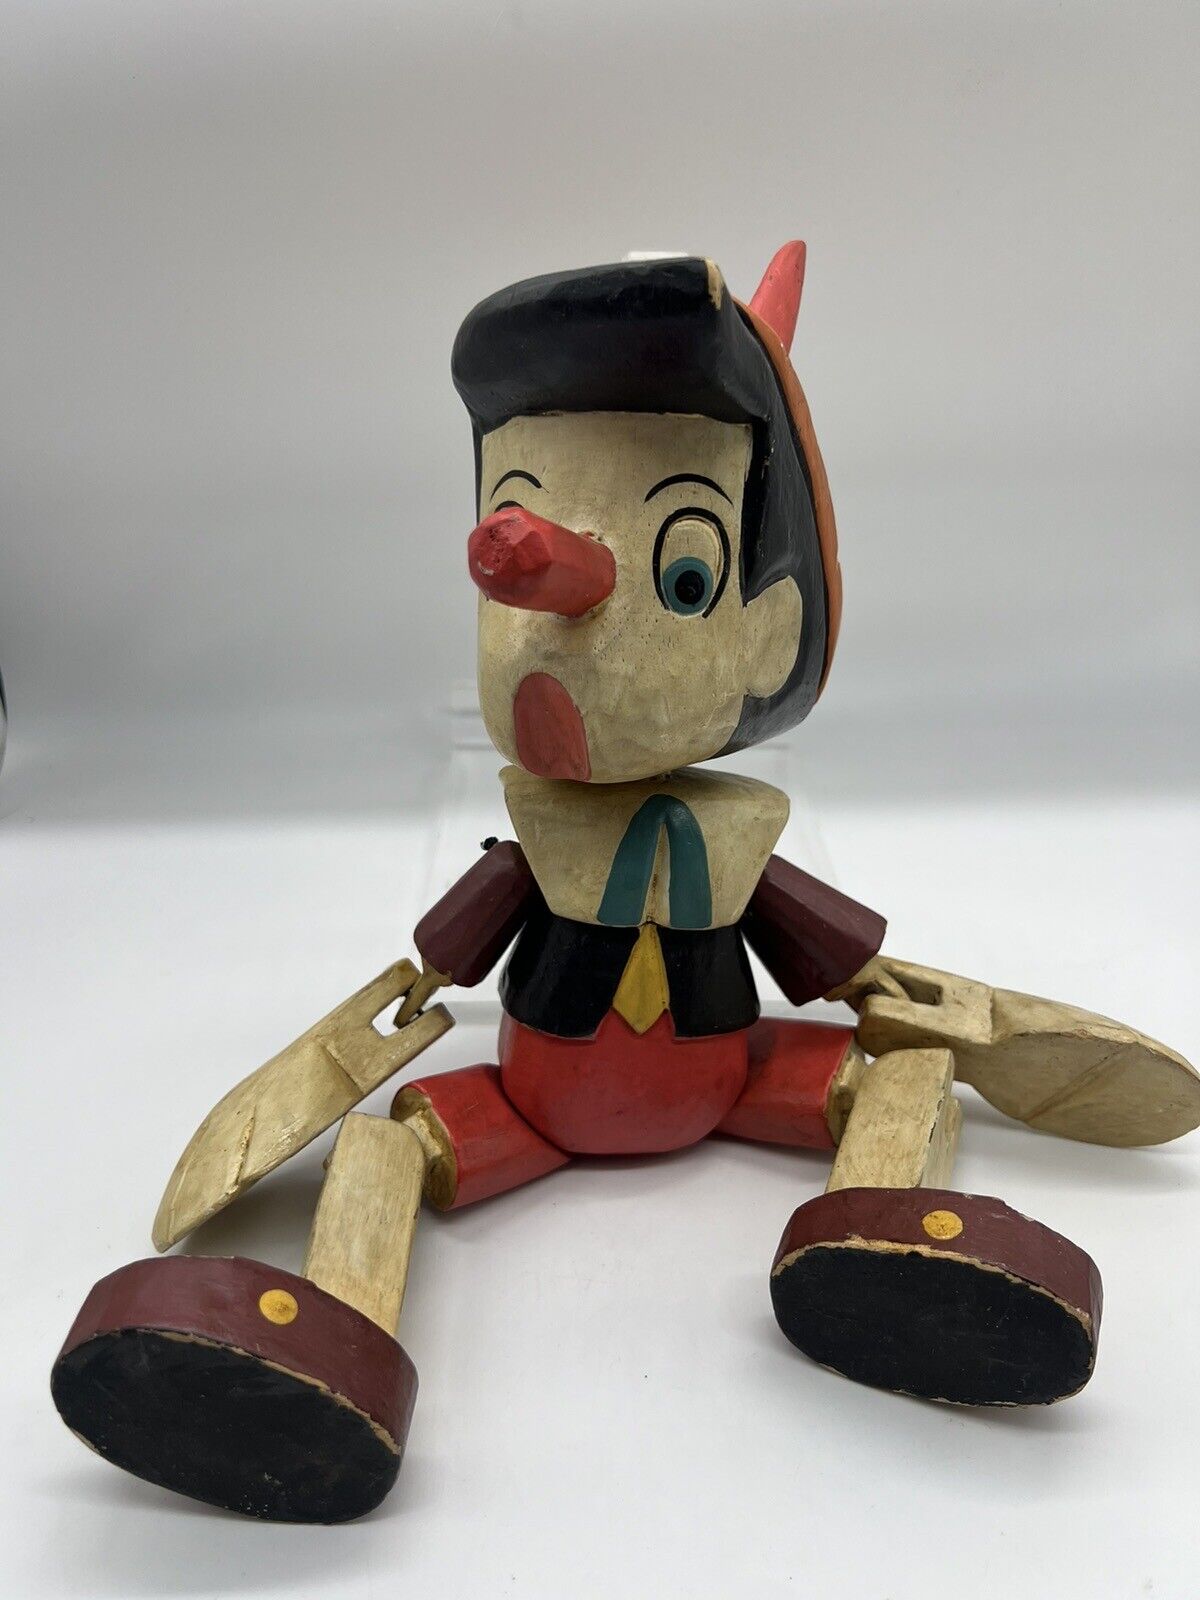 Vtg Disney Pinocchio Carved Painted Wood Articulated Shelf Sitter Doll Puppet